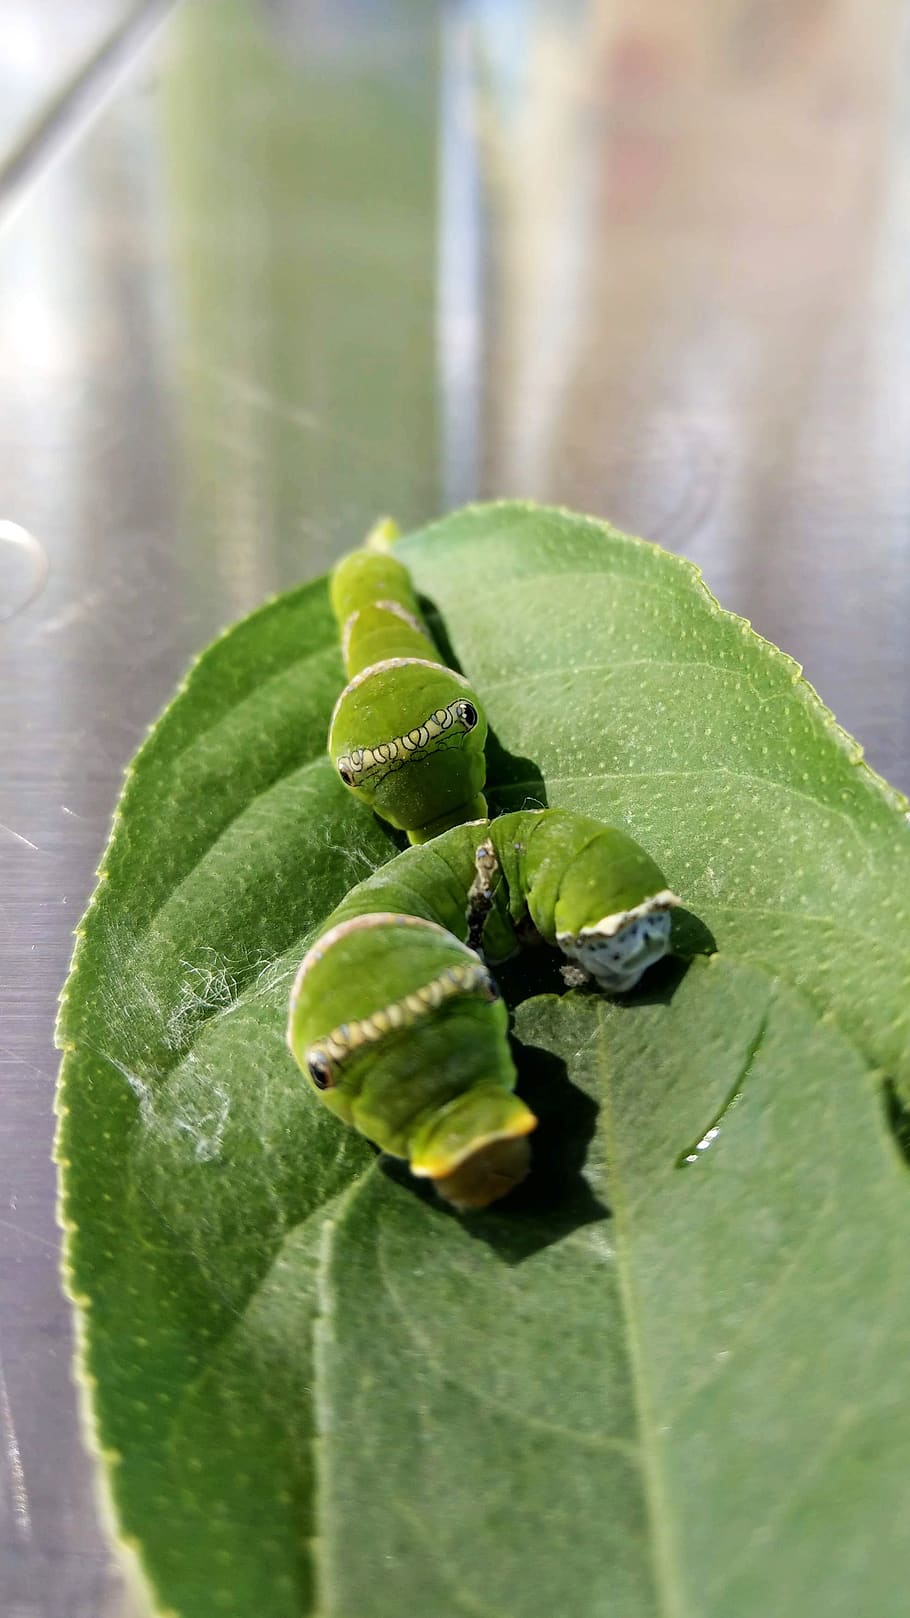 butterfly caterpillars, caterpillar, green caterpillar, butterfly, larvae, green, papilio, insect larvae, insect, leaf